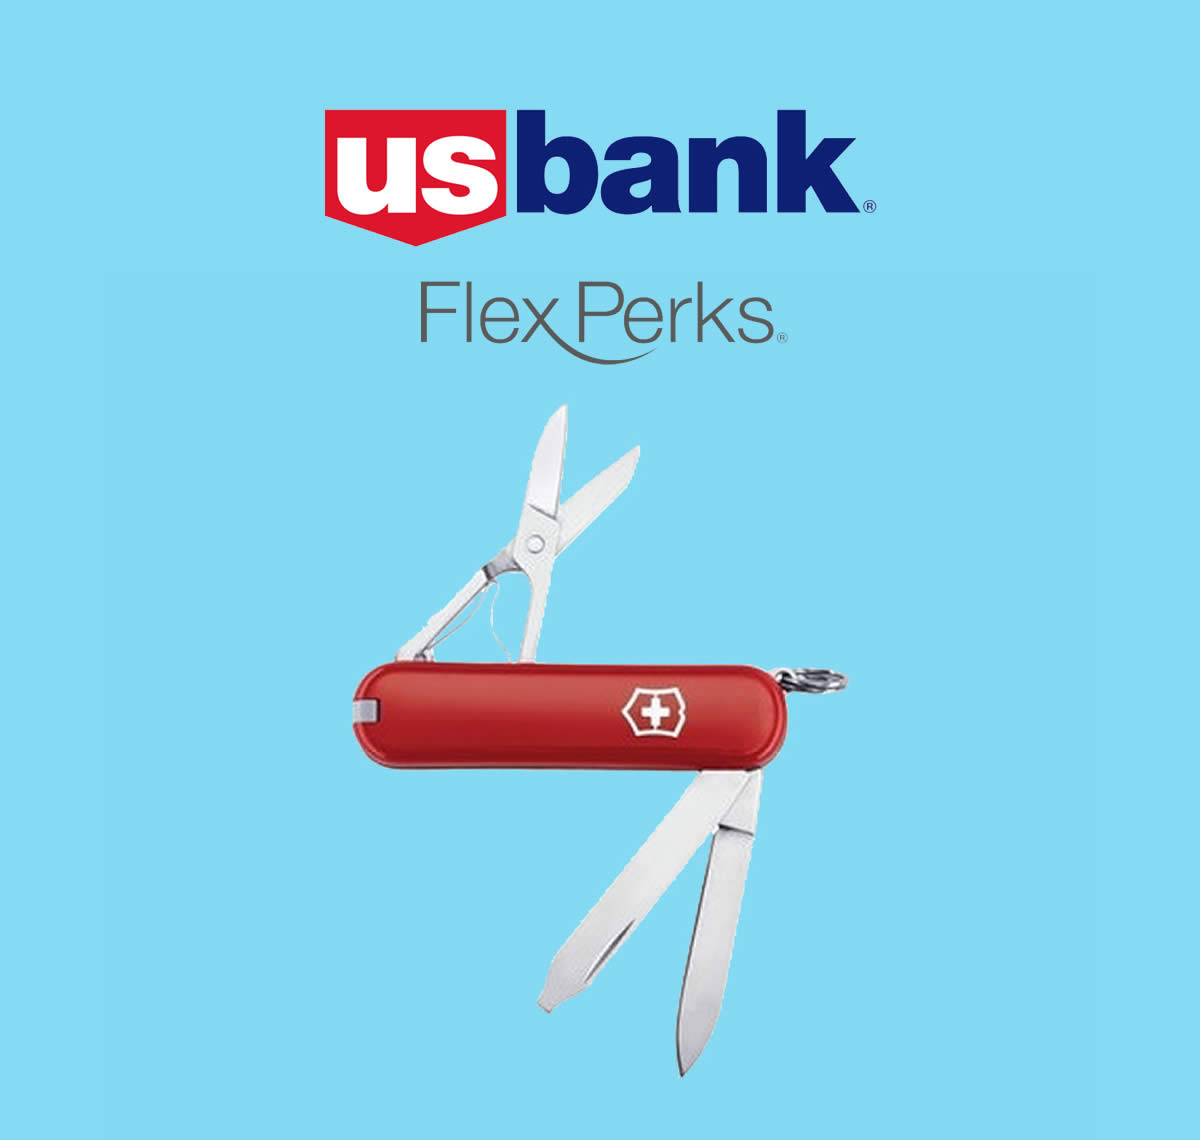 US Bank Flex Perks with Classic SD Pocket Knife